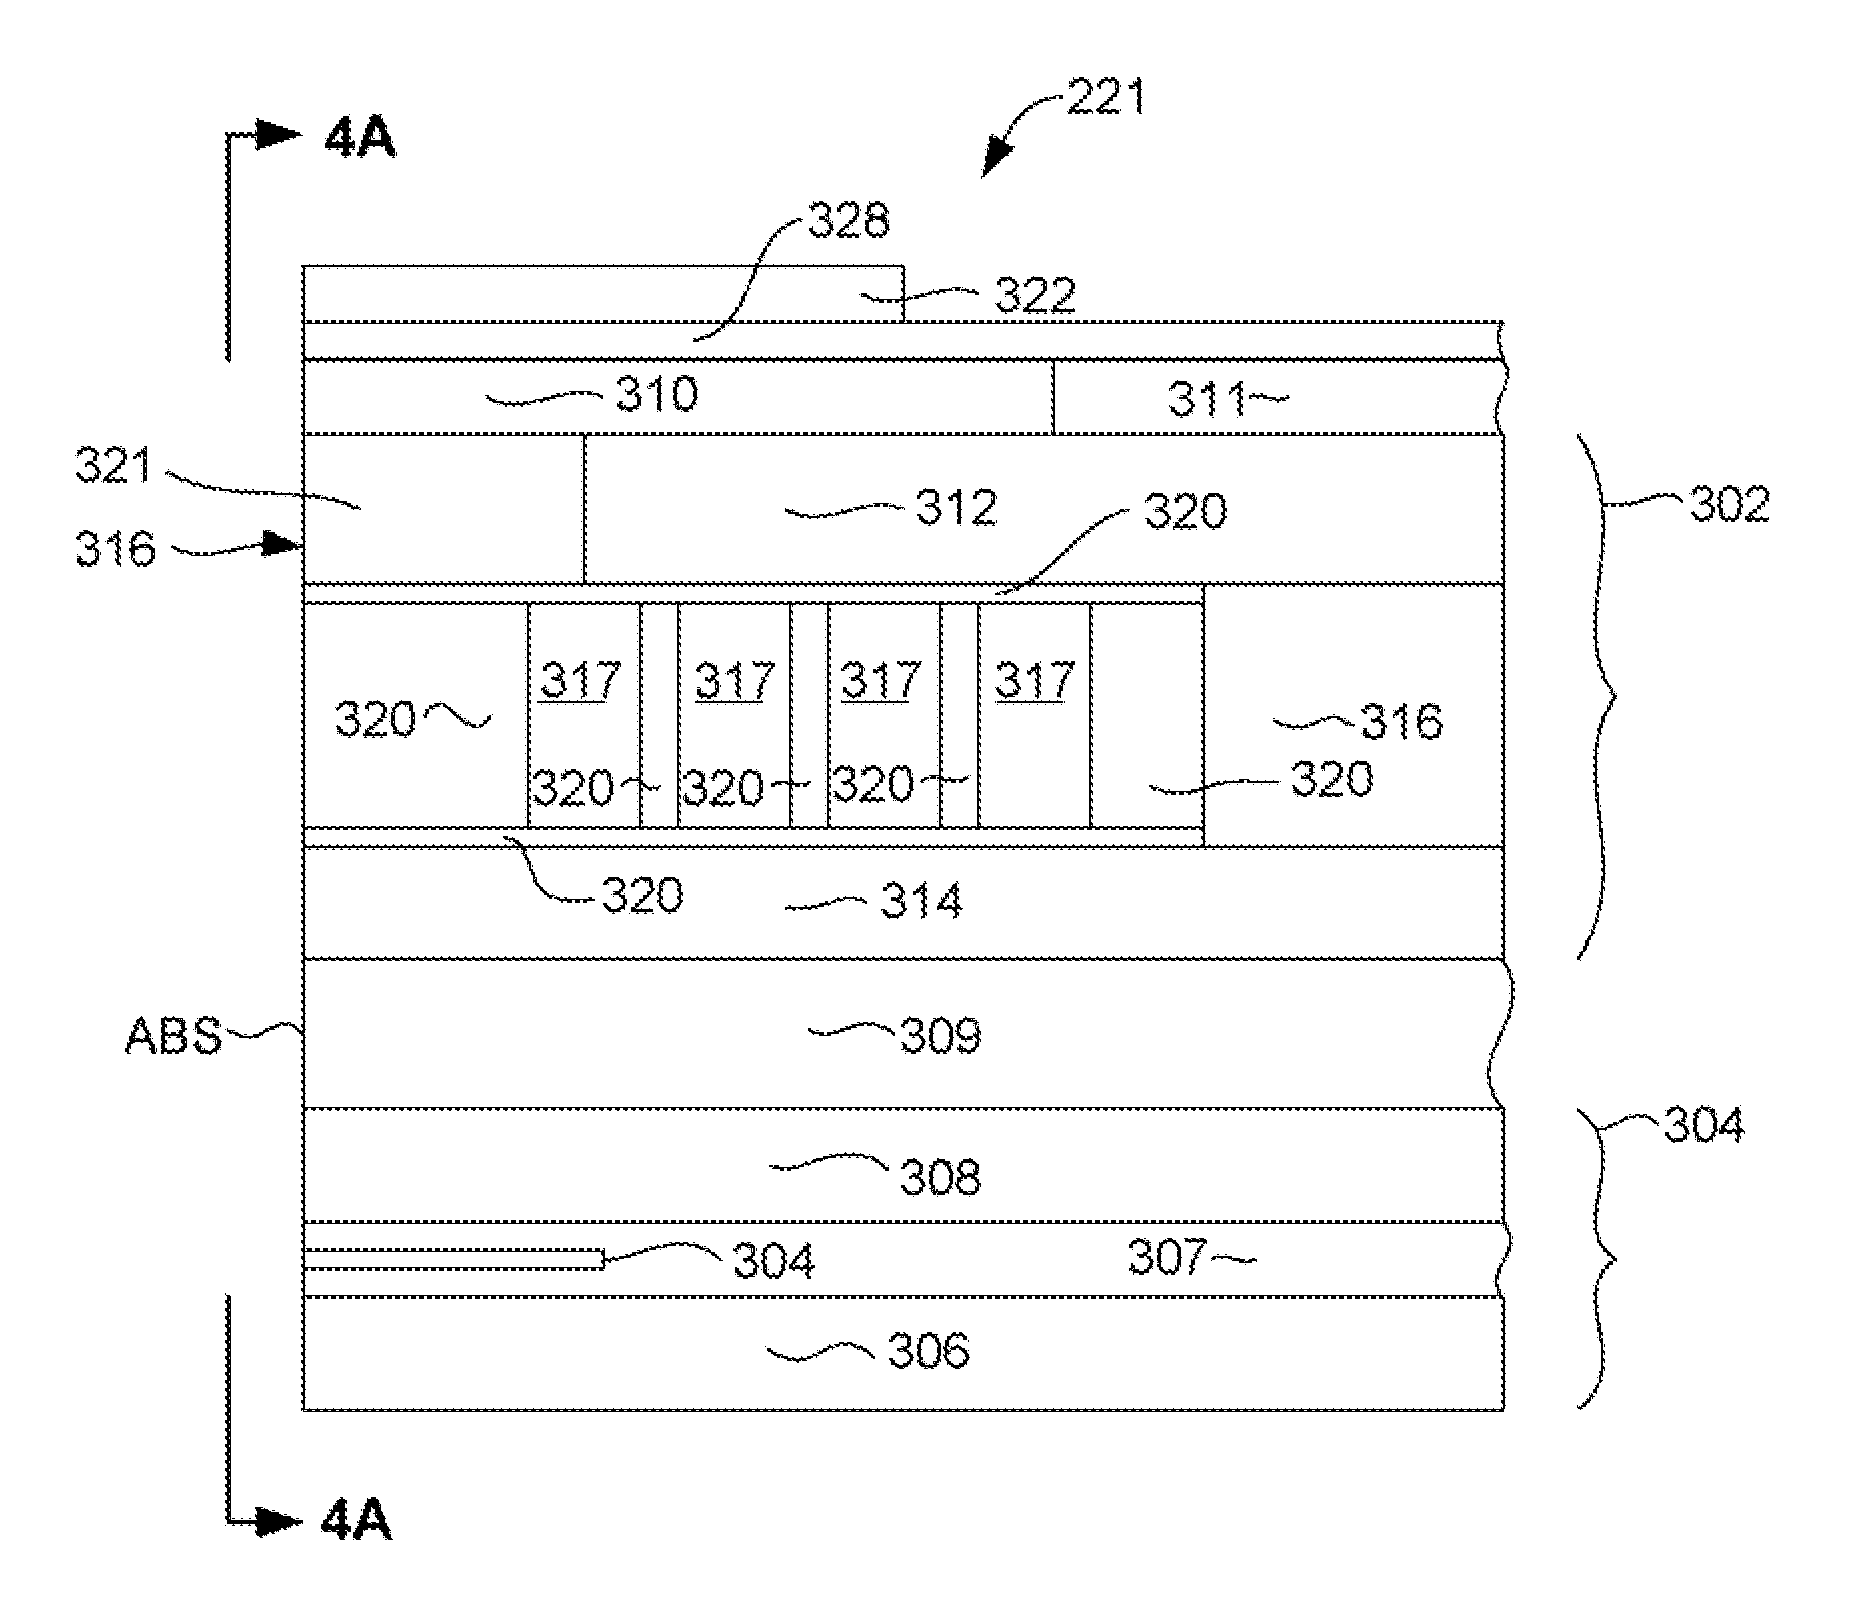 Perpendicular magnetic write head having a conformal, wrap-around, trailing magnetic shield for reduced adjacent track interference